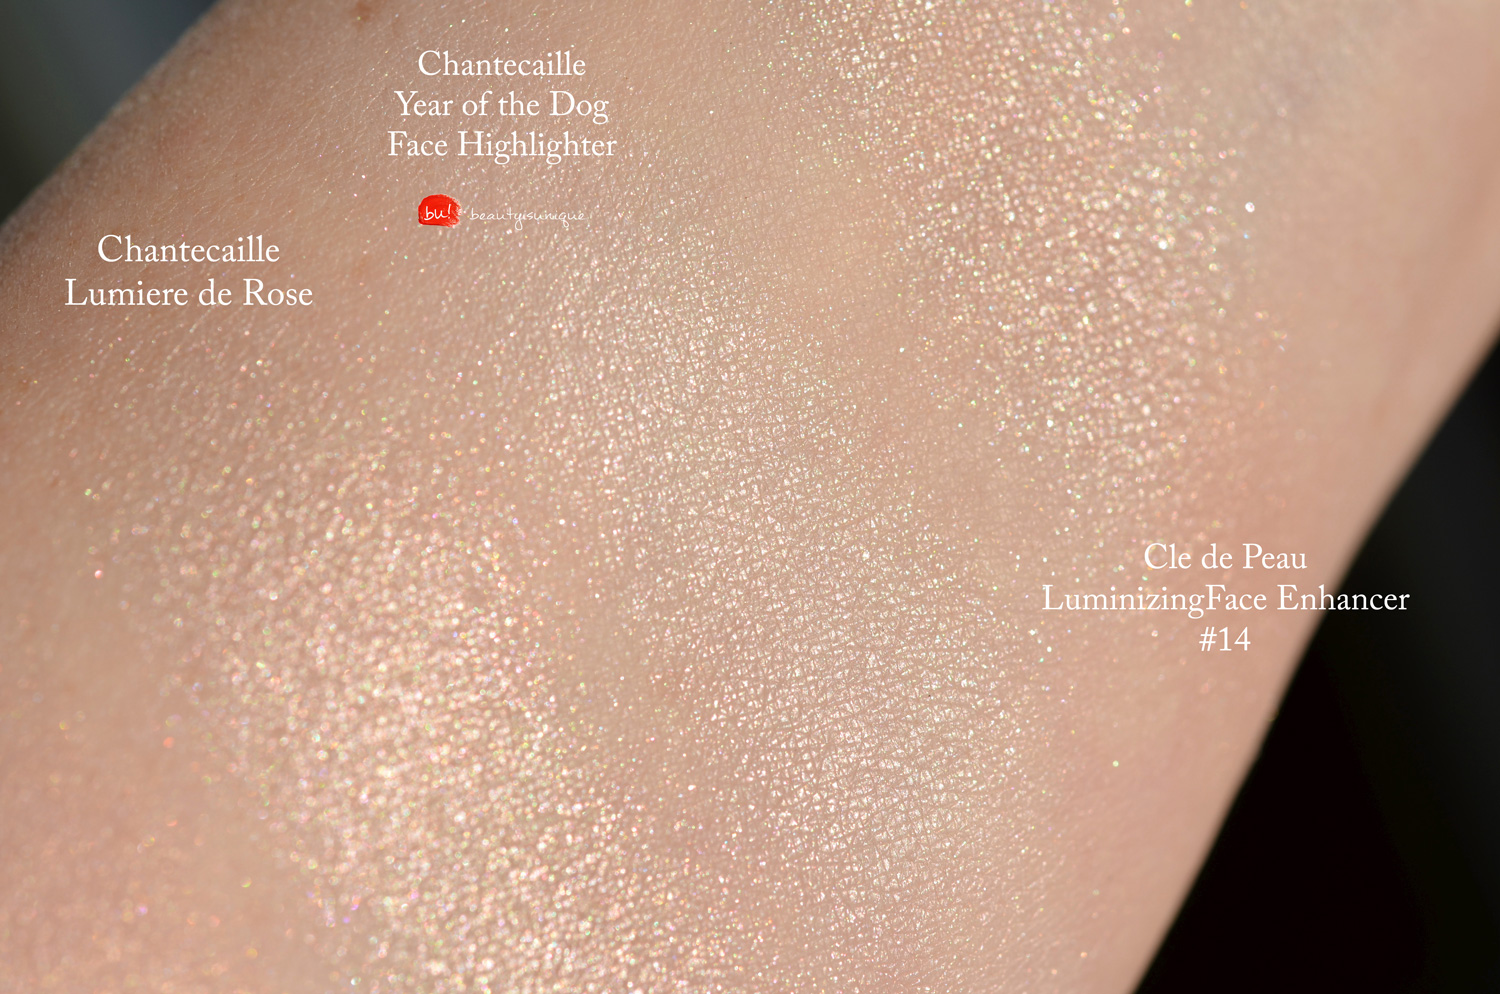 chantecaille-year-of-the-dog-face-highlighter